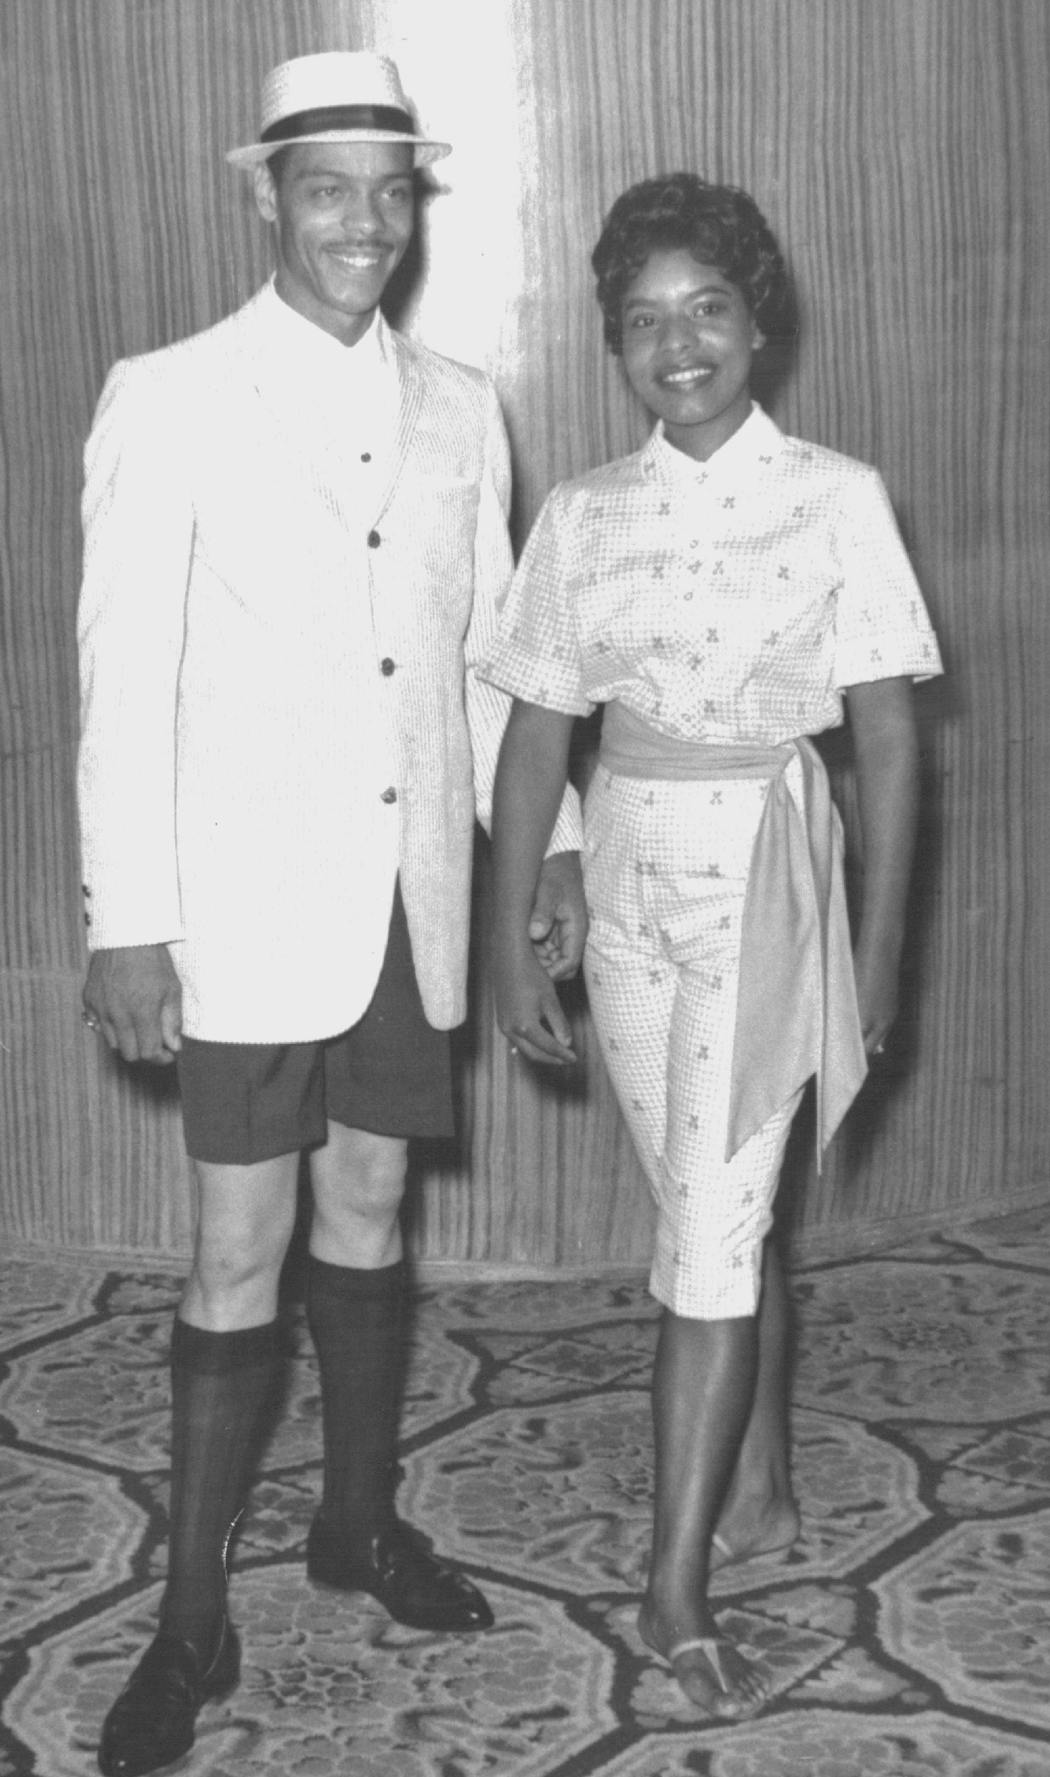 Gordon Kirk appeared with Toni Hughes Allen in an NAACP Style Show in summer 1960 at the Prom Ballroom in St. Paul.